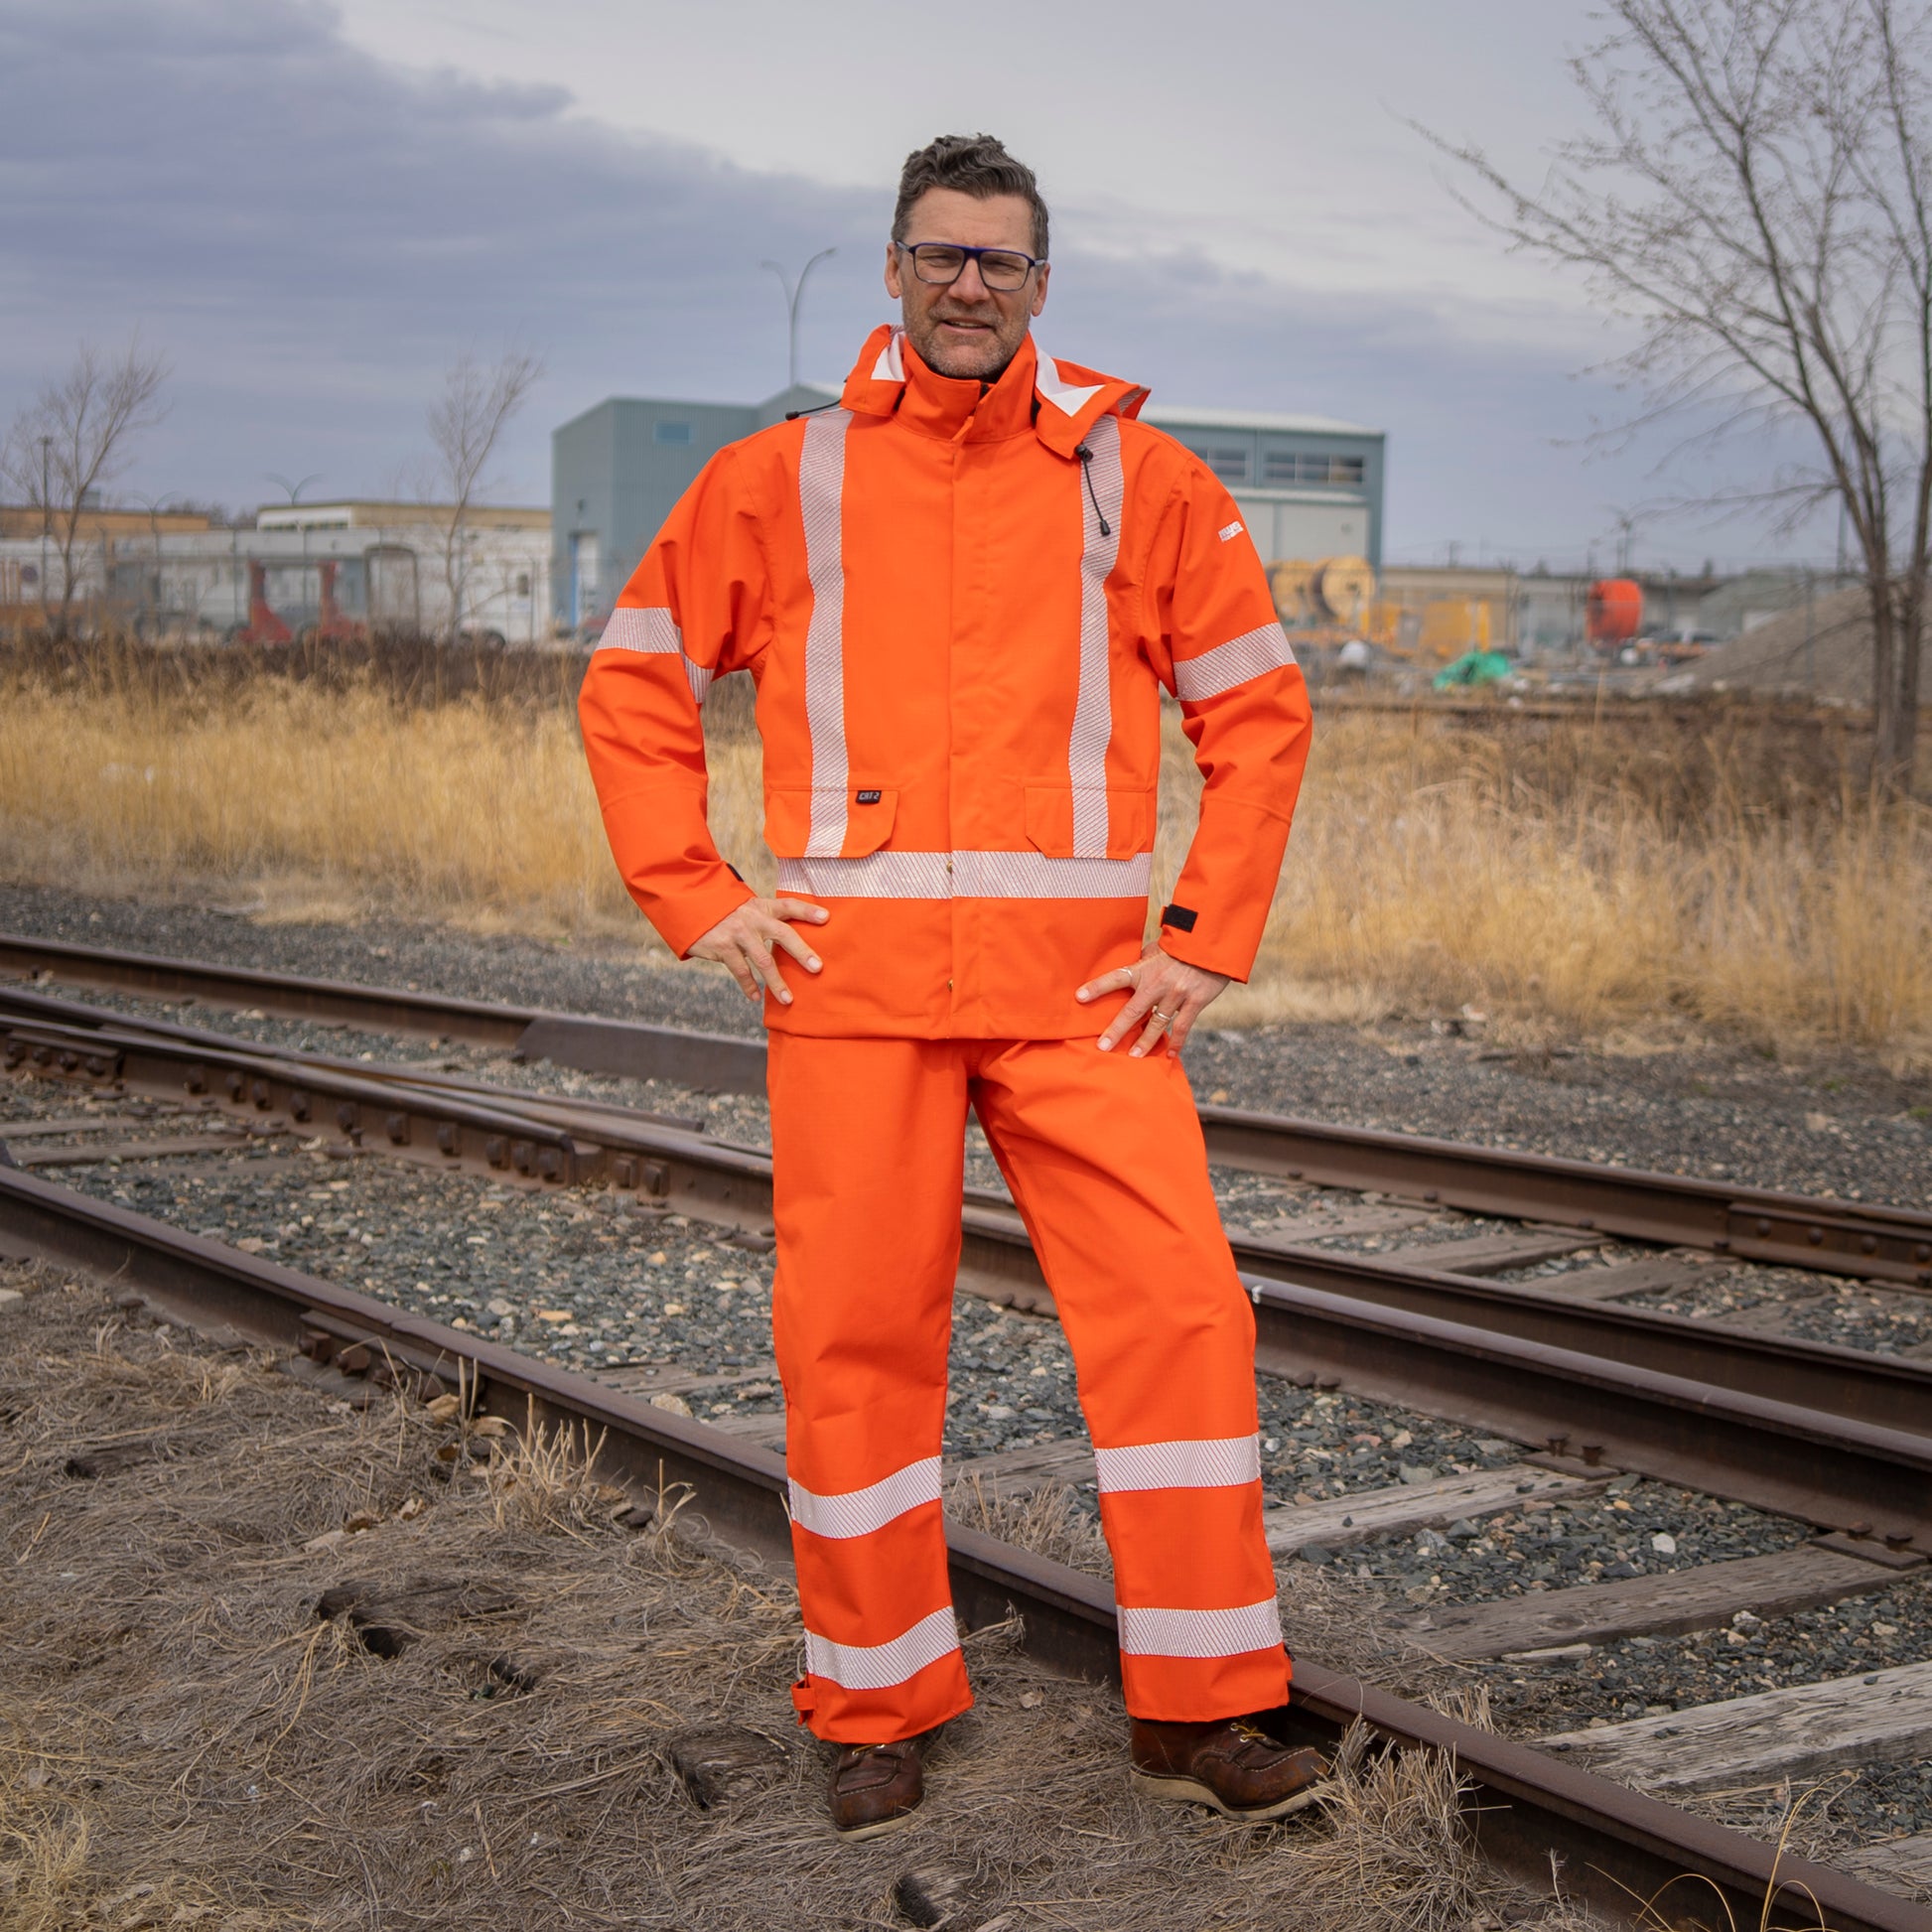 Image of MWG STORMSHIELD FR Rain Proof Bib. MWG STORMSHIELD FR Bib is bright orange in colour with silver segmented reflective tape on lower legs to meet high-visibility standard CSA Z96-15. Model is wearing MWG STORMSHIELD FR Bib with bright orange MWG STORMSHIELD FR rain jacket. MWG STORMSHIELD is an inherent flame-resistant (FR) laminated fabric.